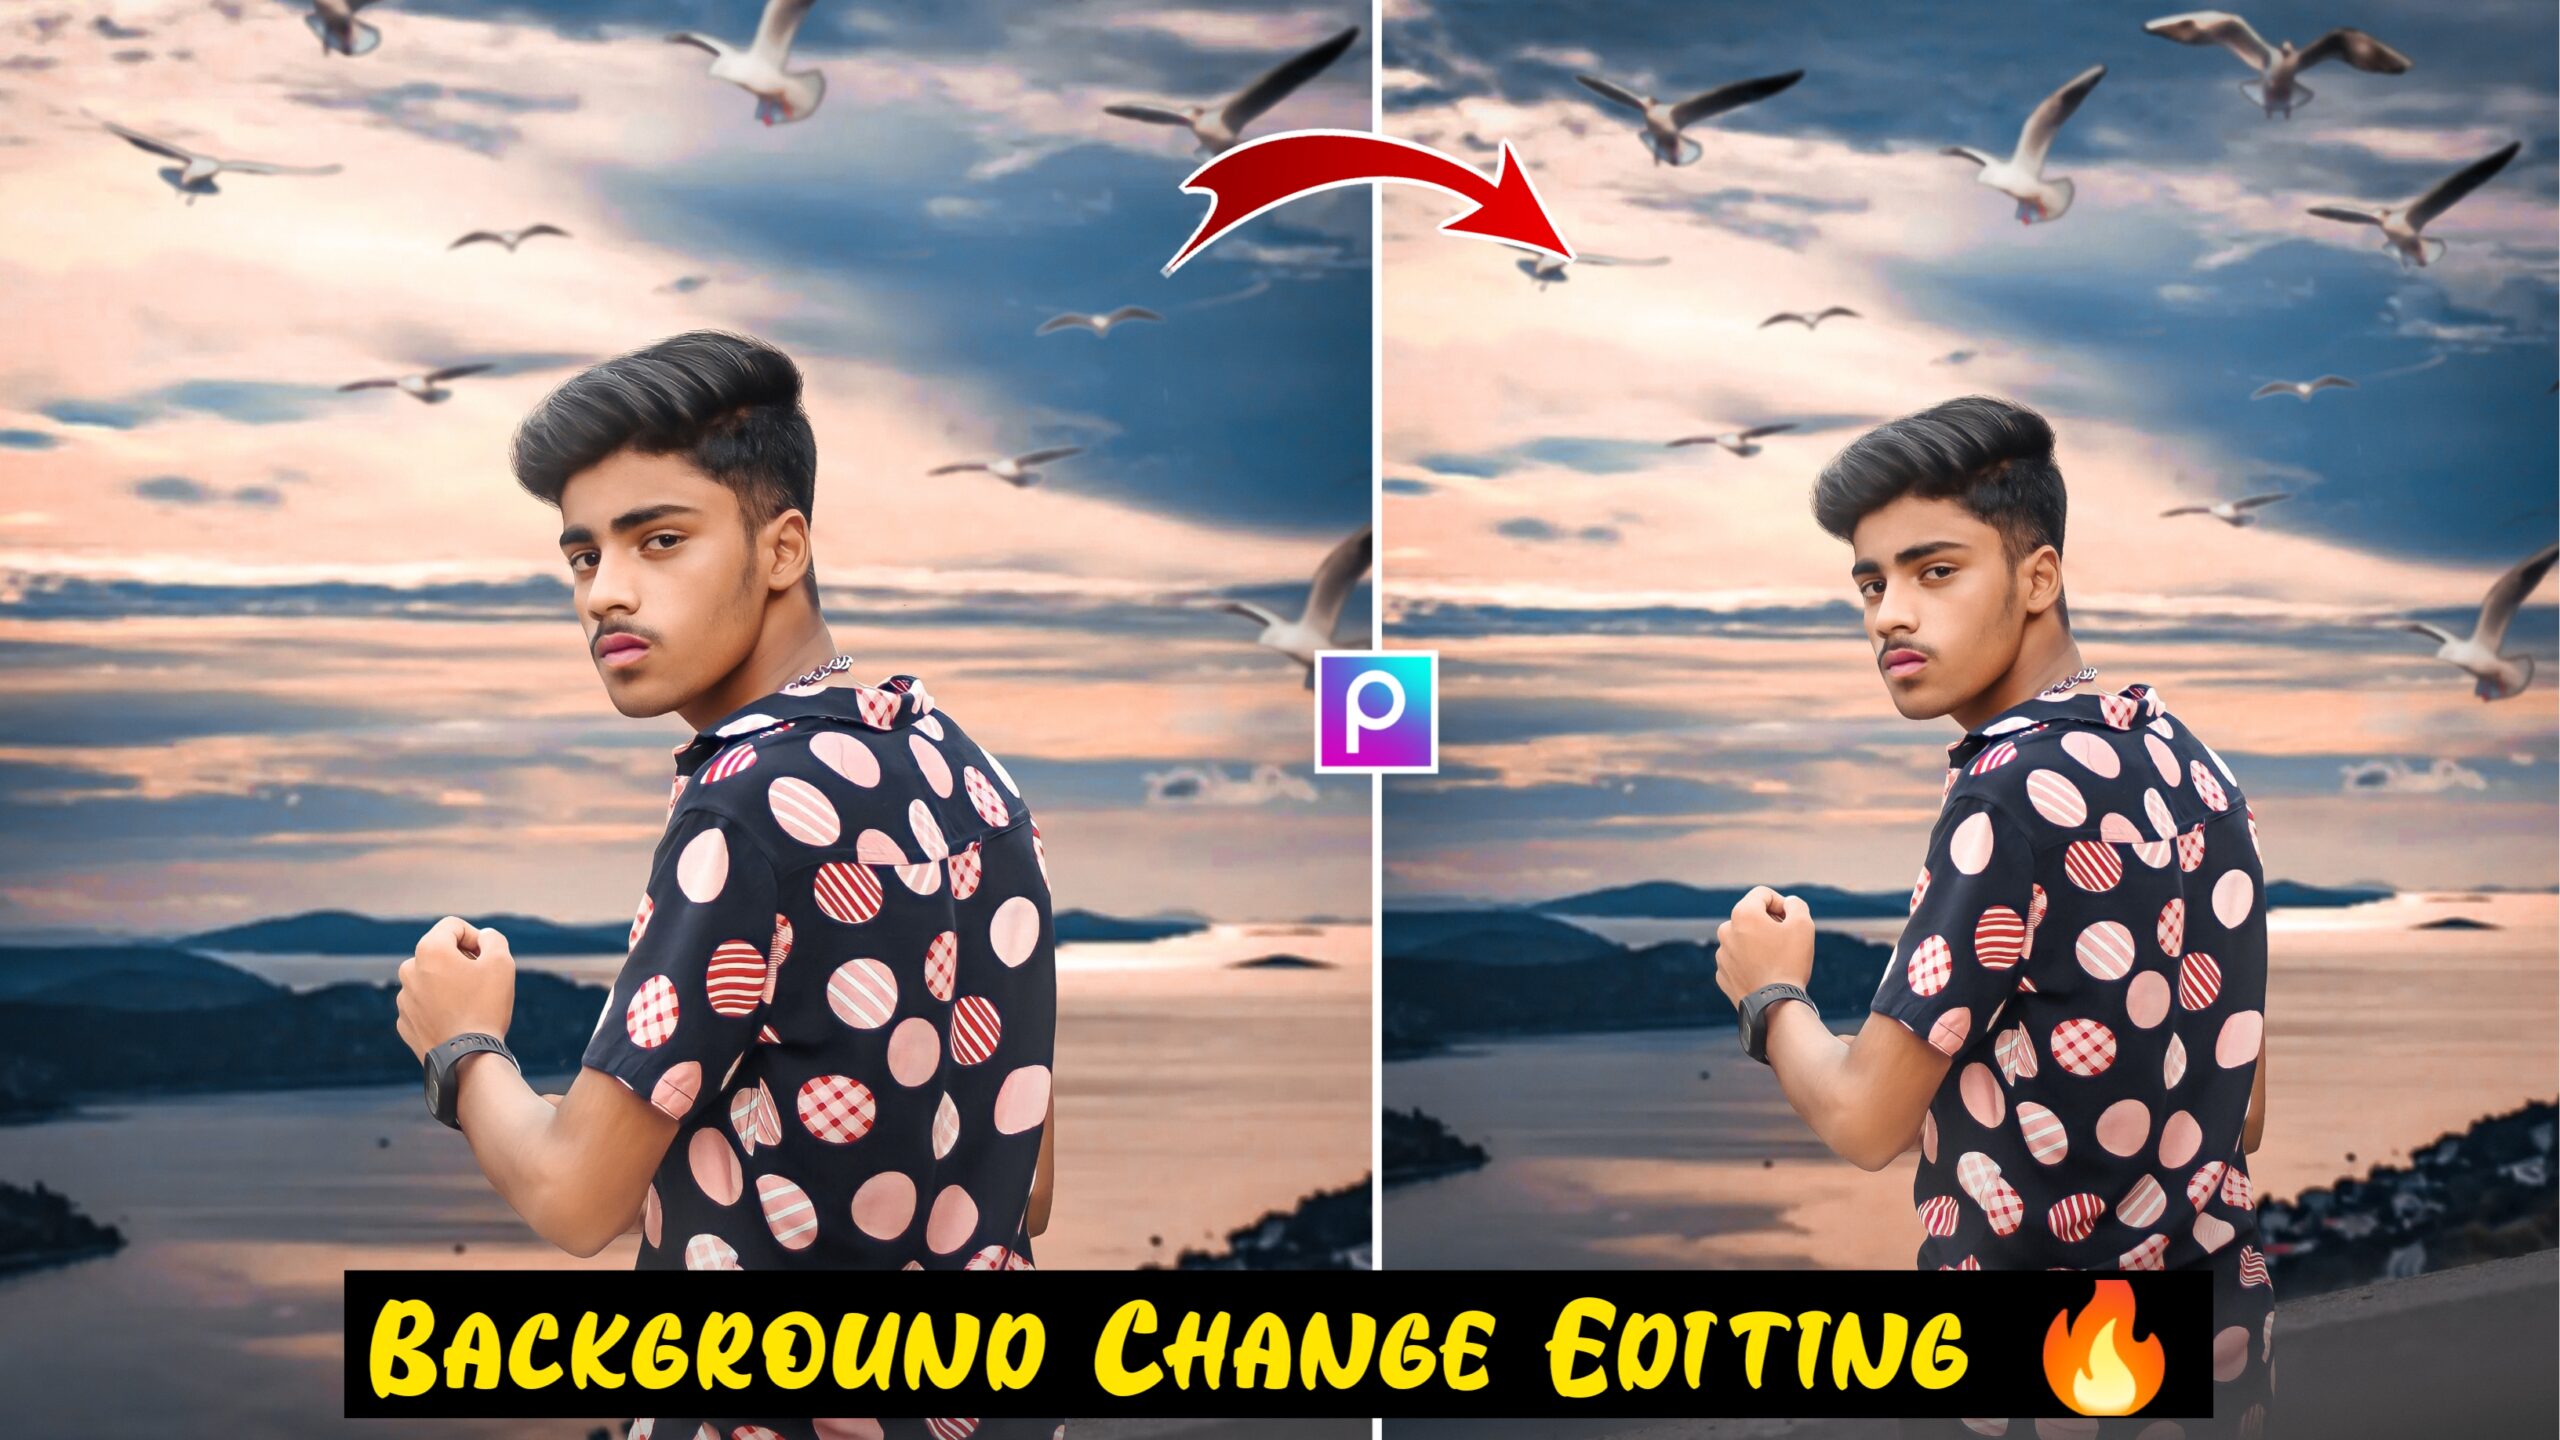 PicsArt Background Change Photo Editing in Hindi  Free Editing Background  Download 